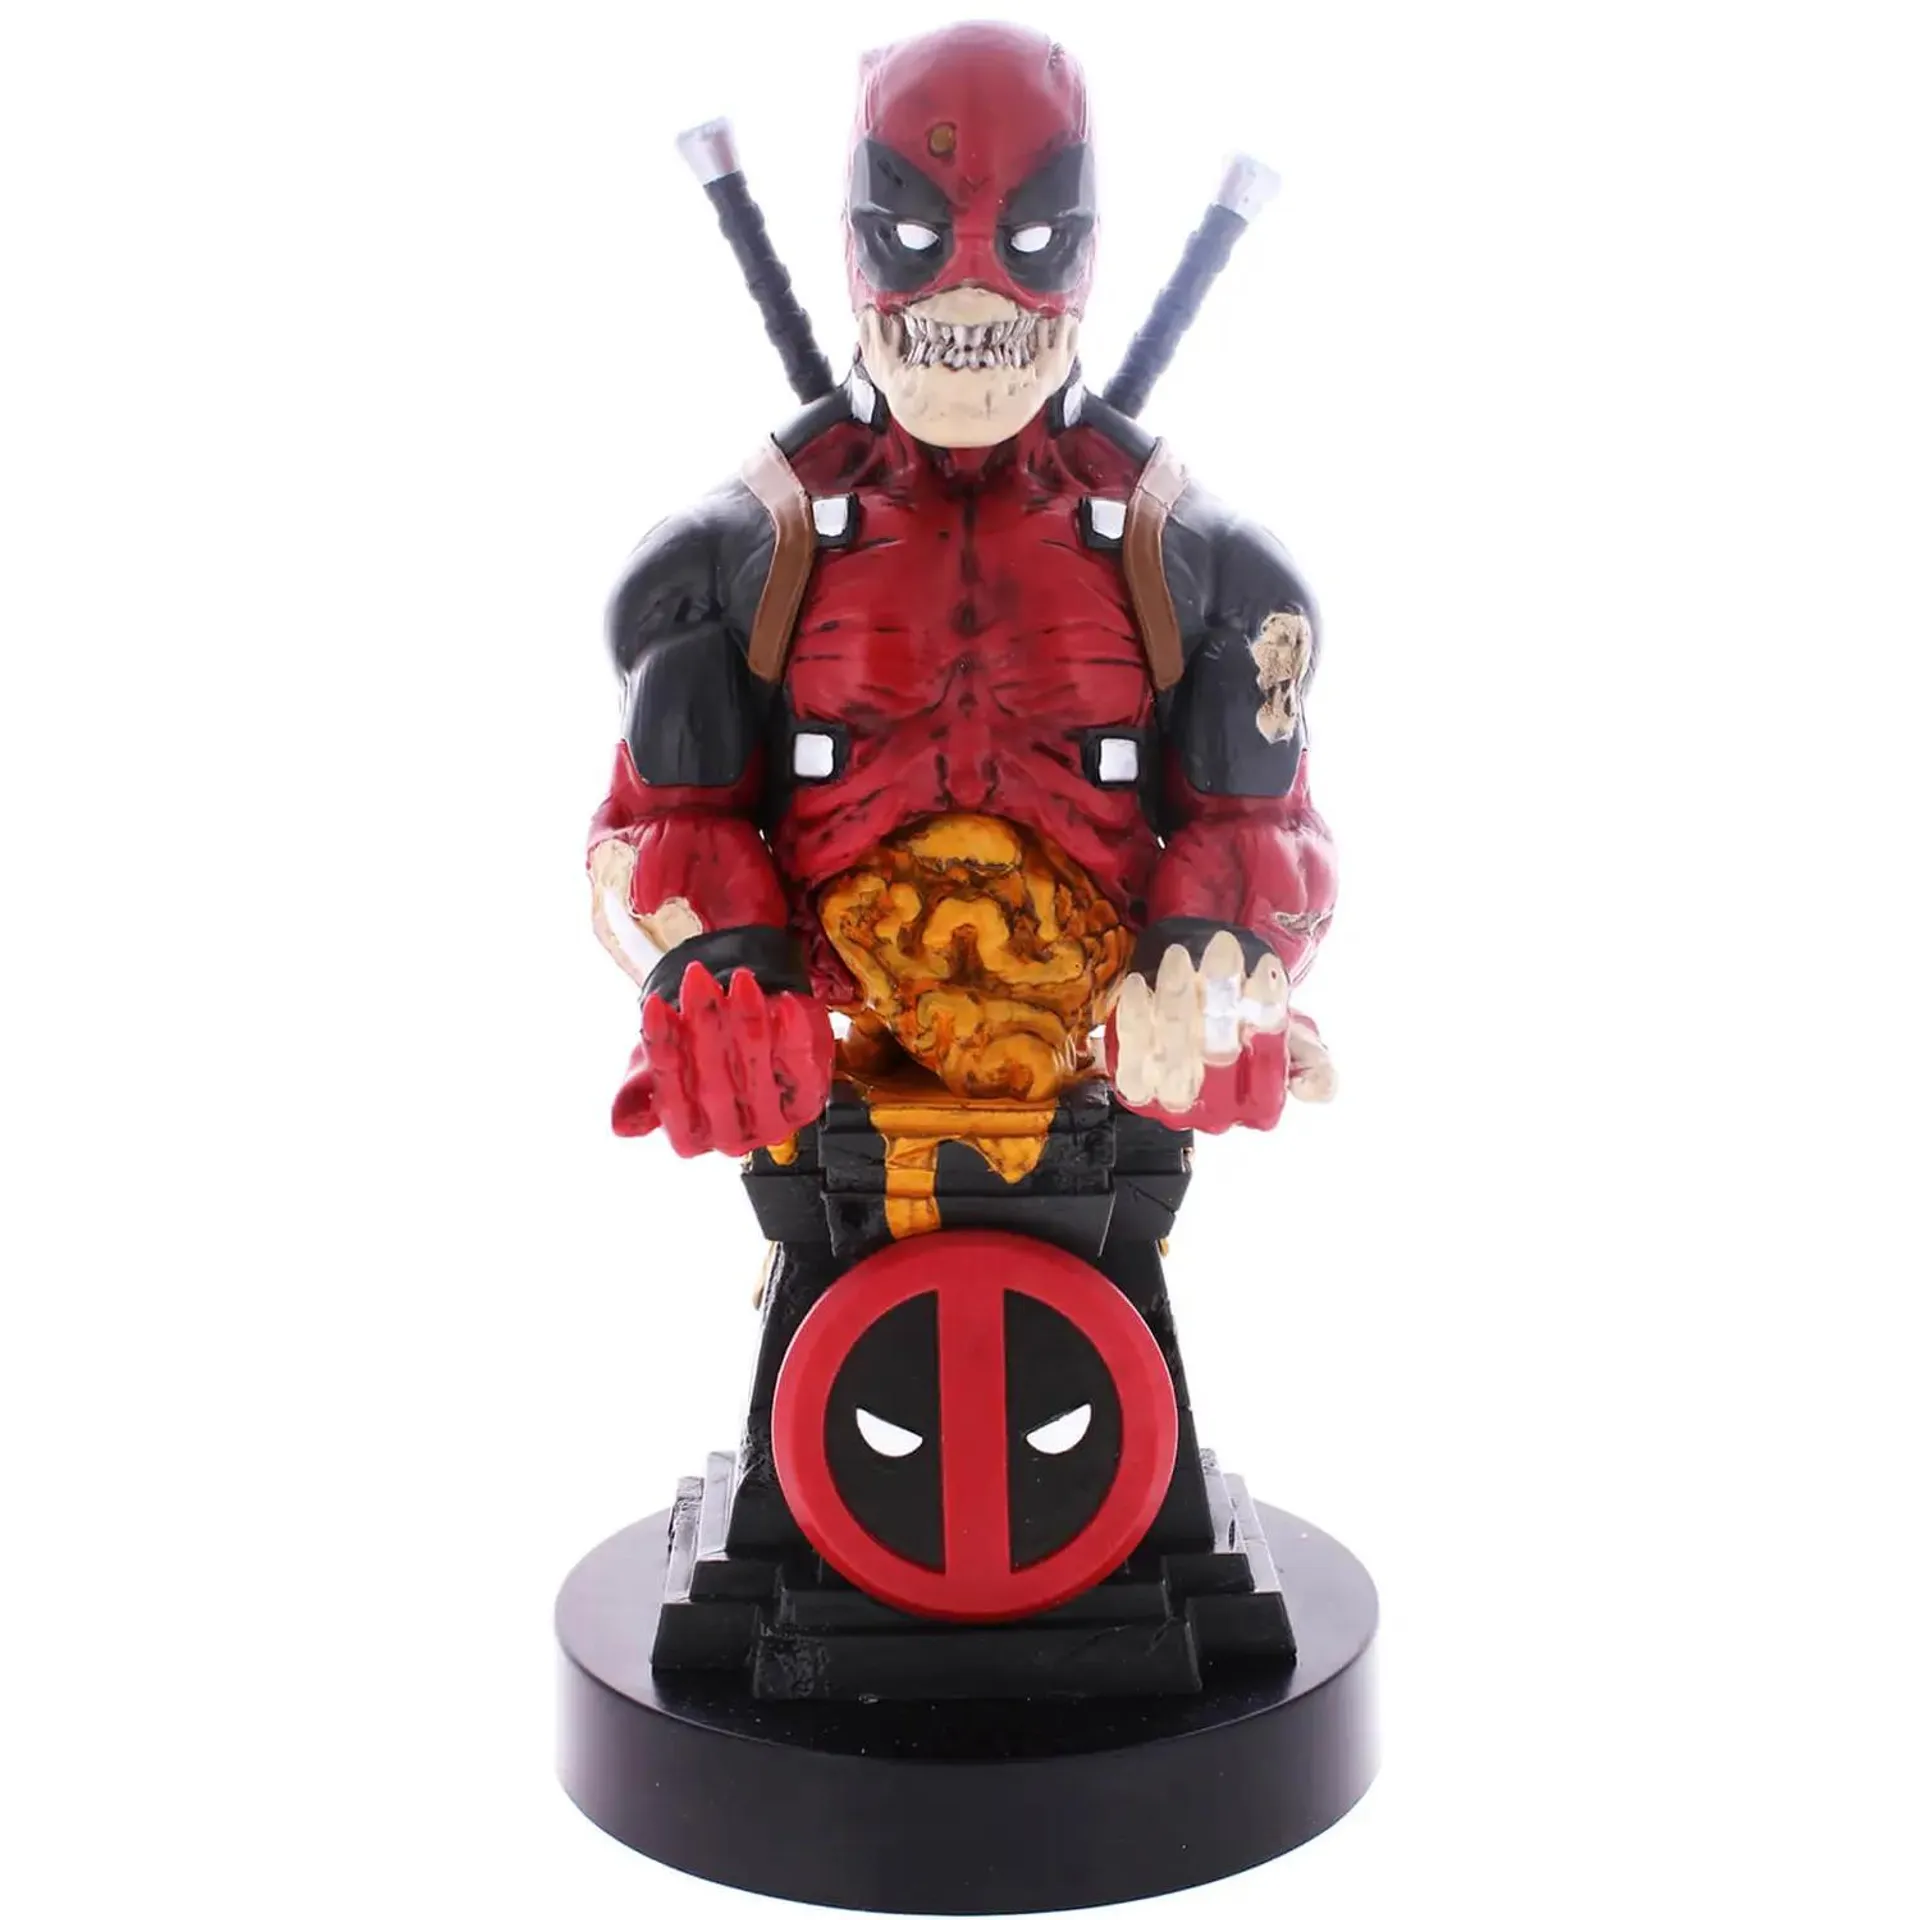 Cable Guys Marvel Zombie Deadpool Controller and Smartphone Stand - Limited Edition (Zavvi Exclusive)